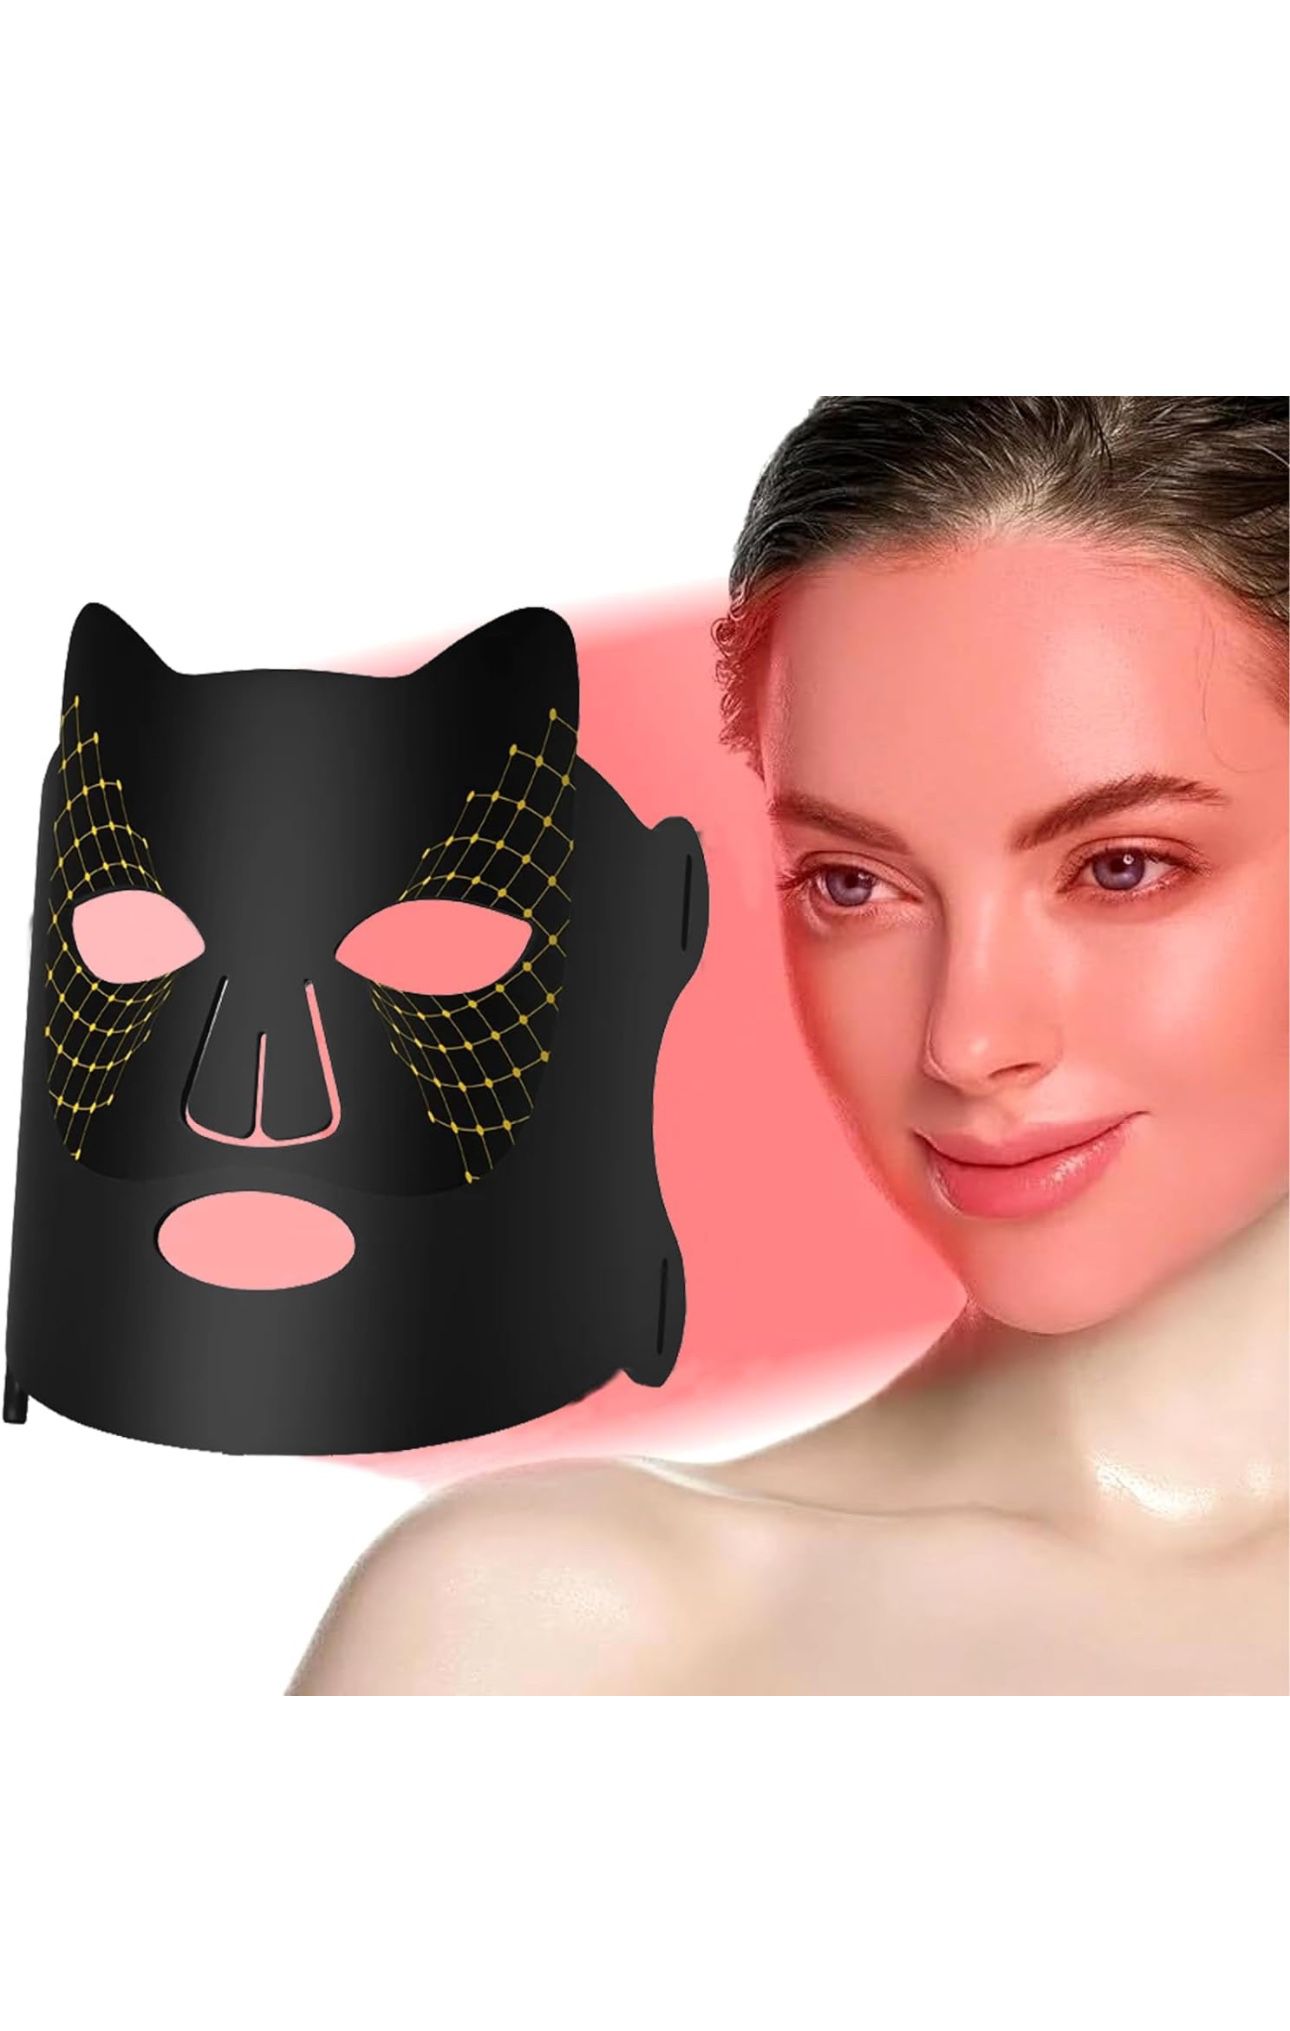 Red Light Therapy for Face, 4 Colors LED Red Light Therapy Silicone Mask 660nm & 850nm Wavelength for Home Use